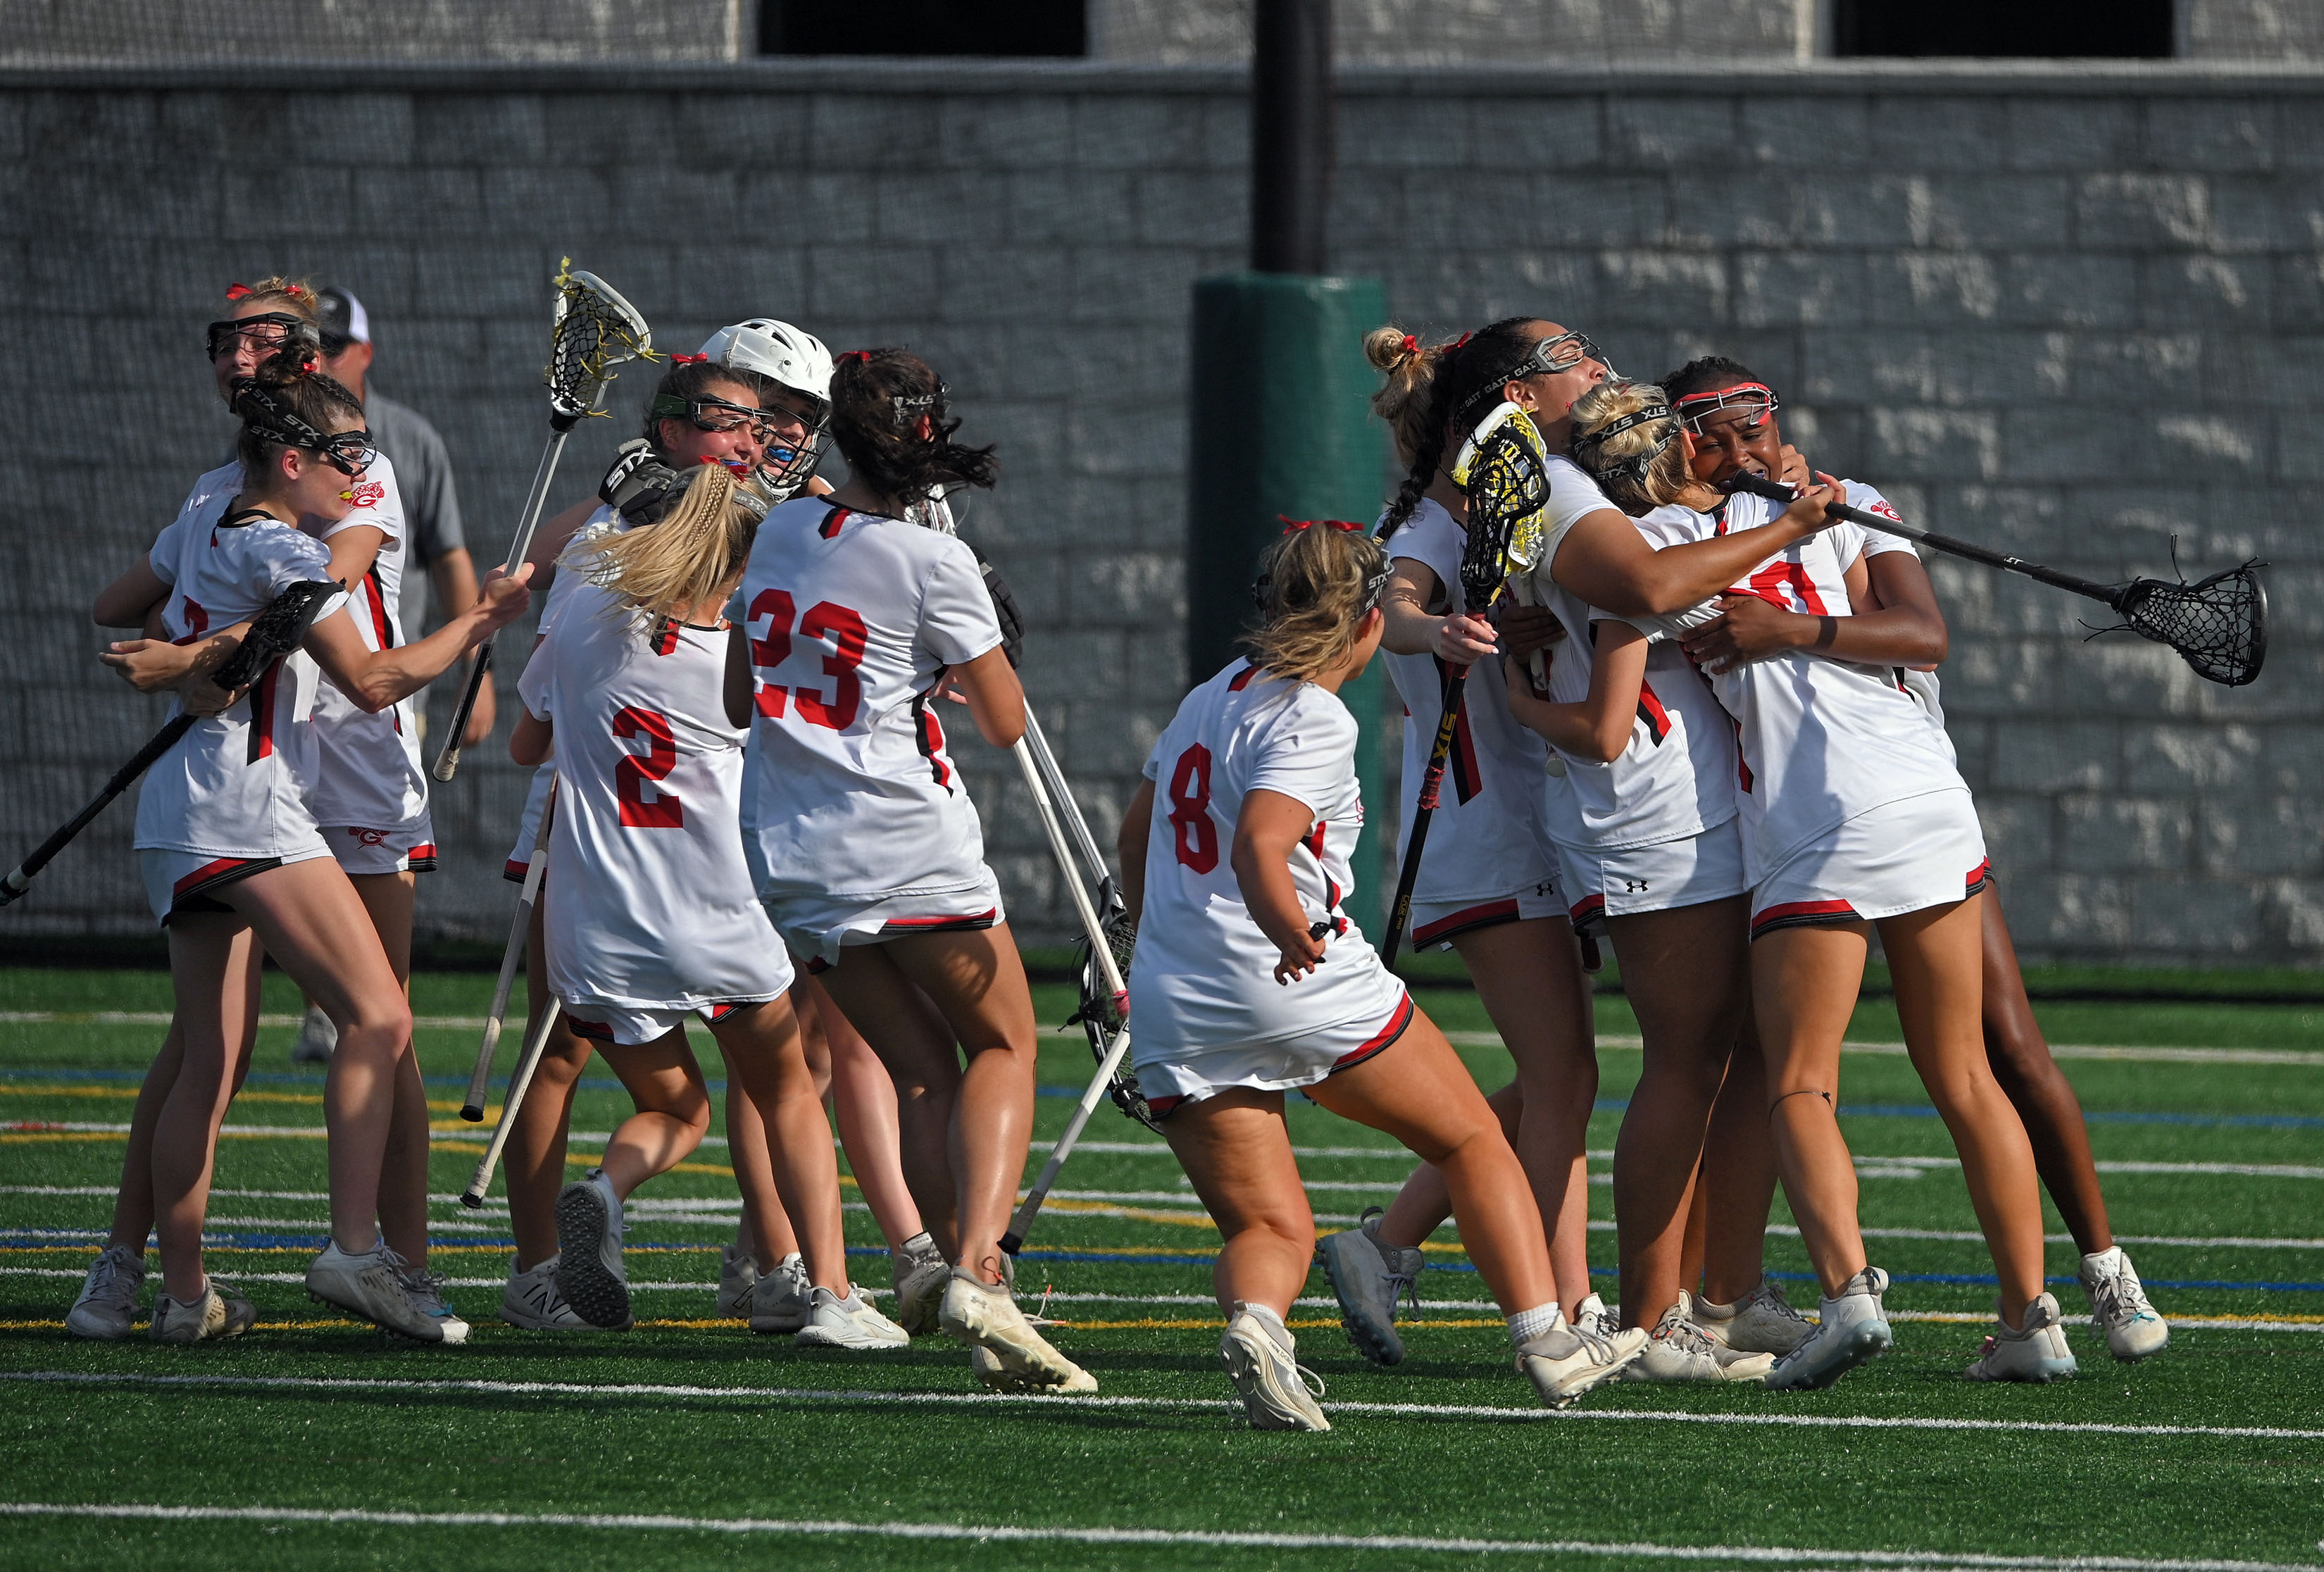 Glenelg players celebrate after defeating Queen Anne's 13-3 to win Class 2A state girls lacrosse championship at Stevenson University. (Kenneth K. Lam/Staff)